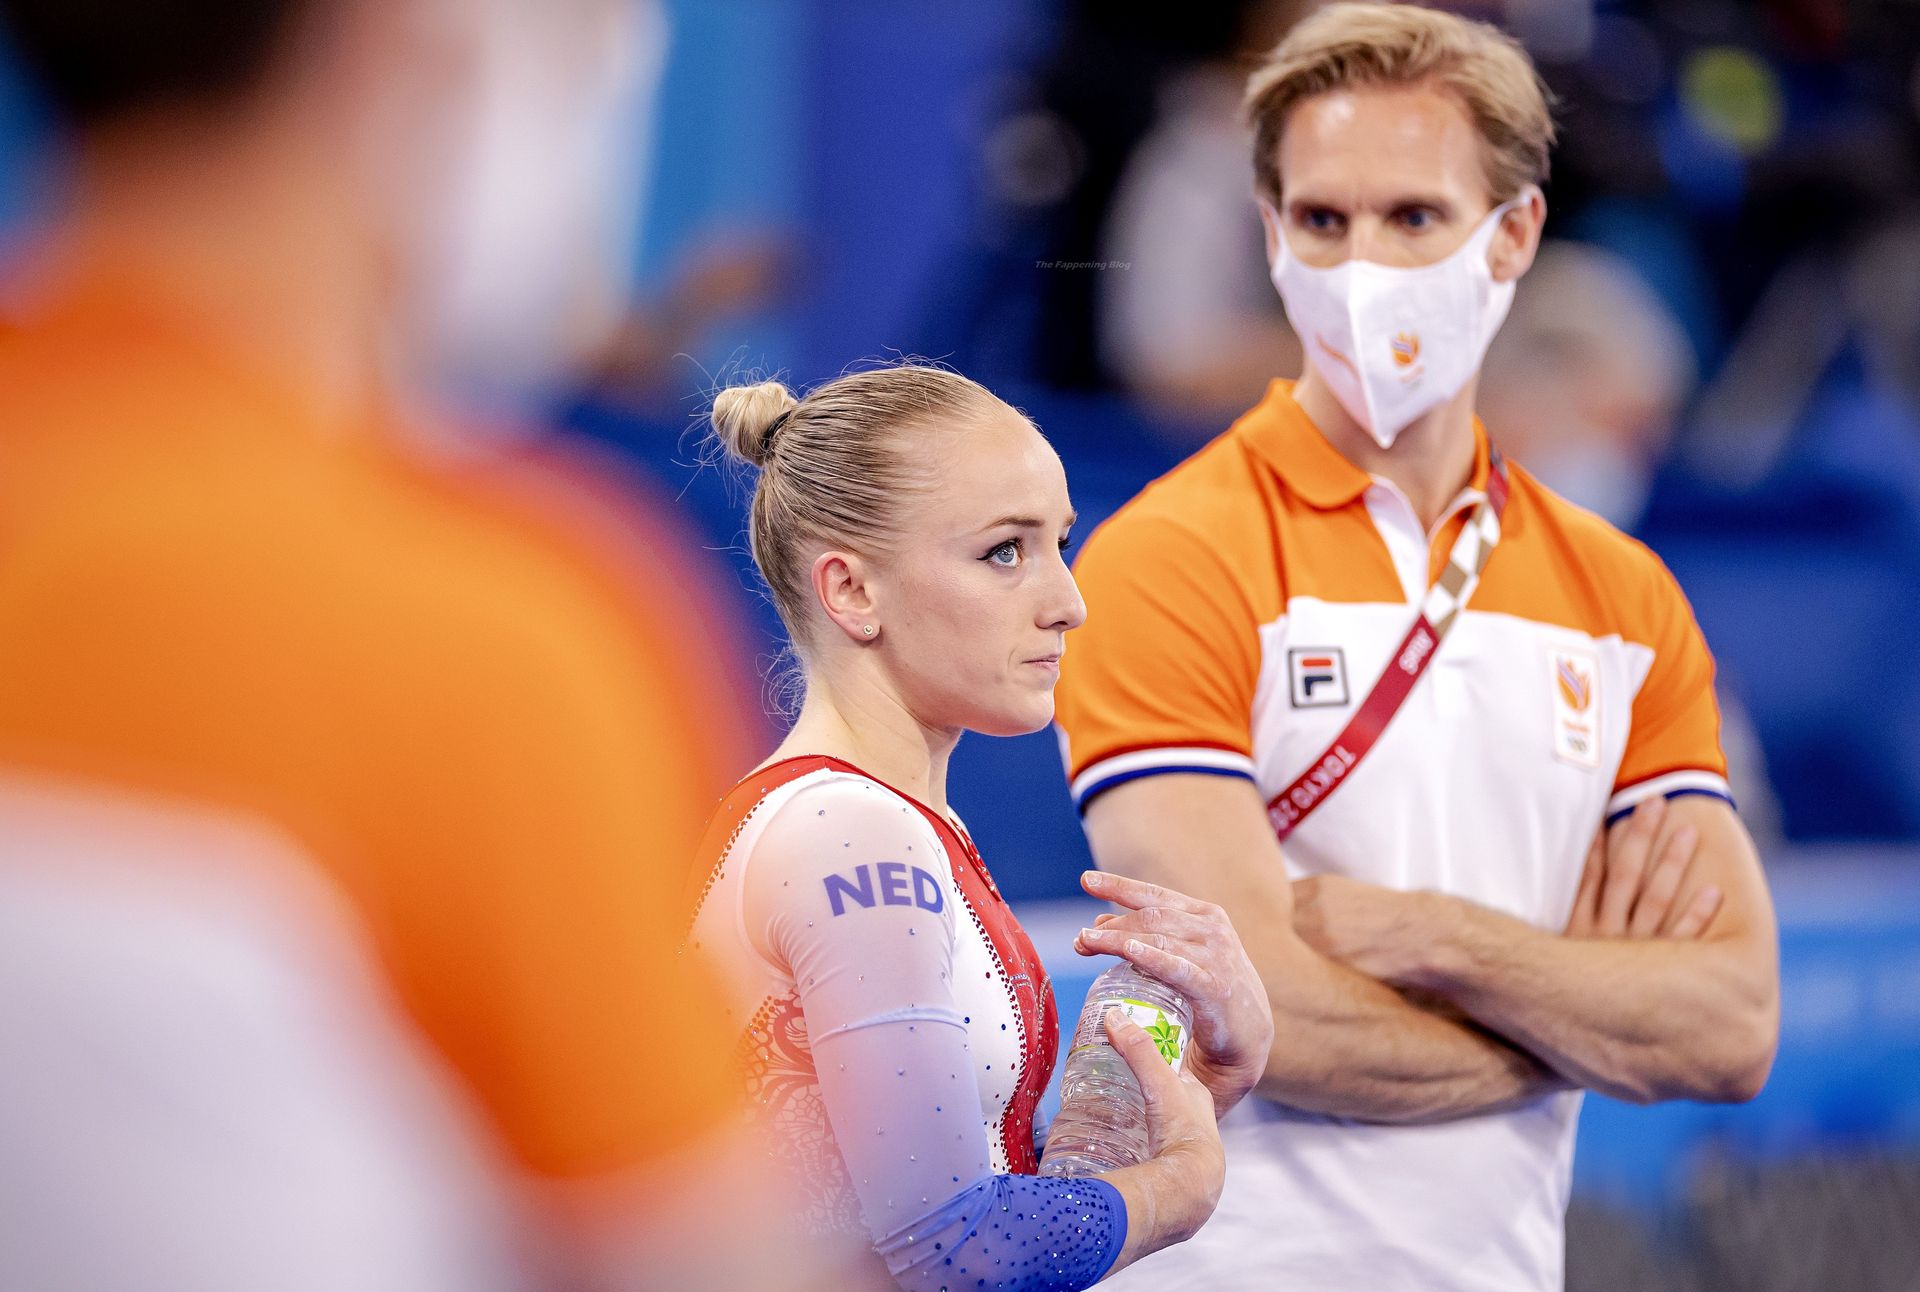 Sanne & Lieke Wevers are Pictured at the Ariake Gymnastics Centre in Tokyo (16 Photos)